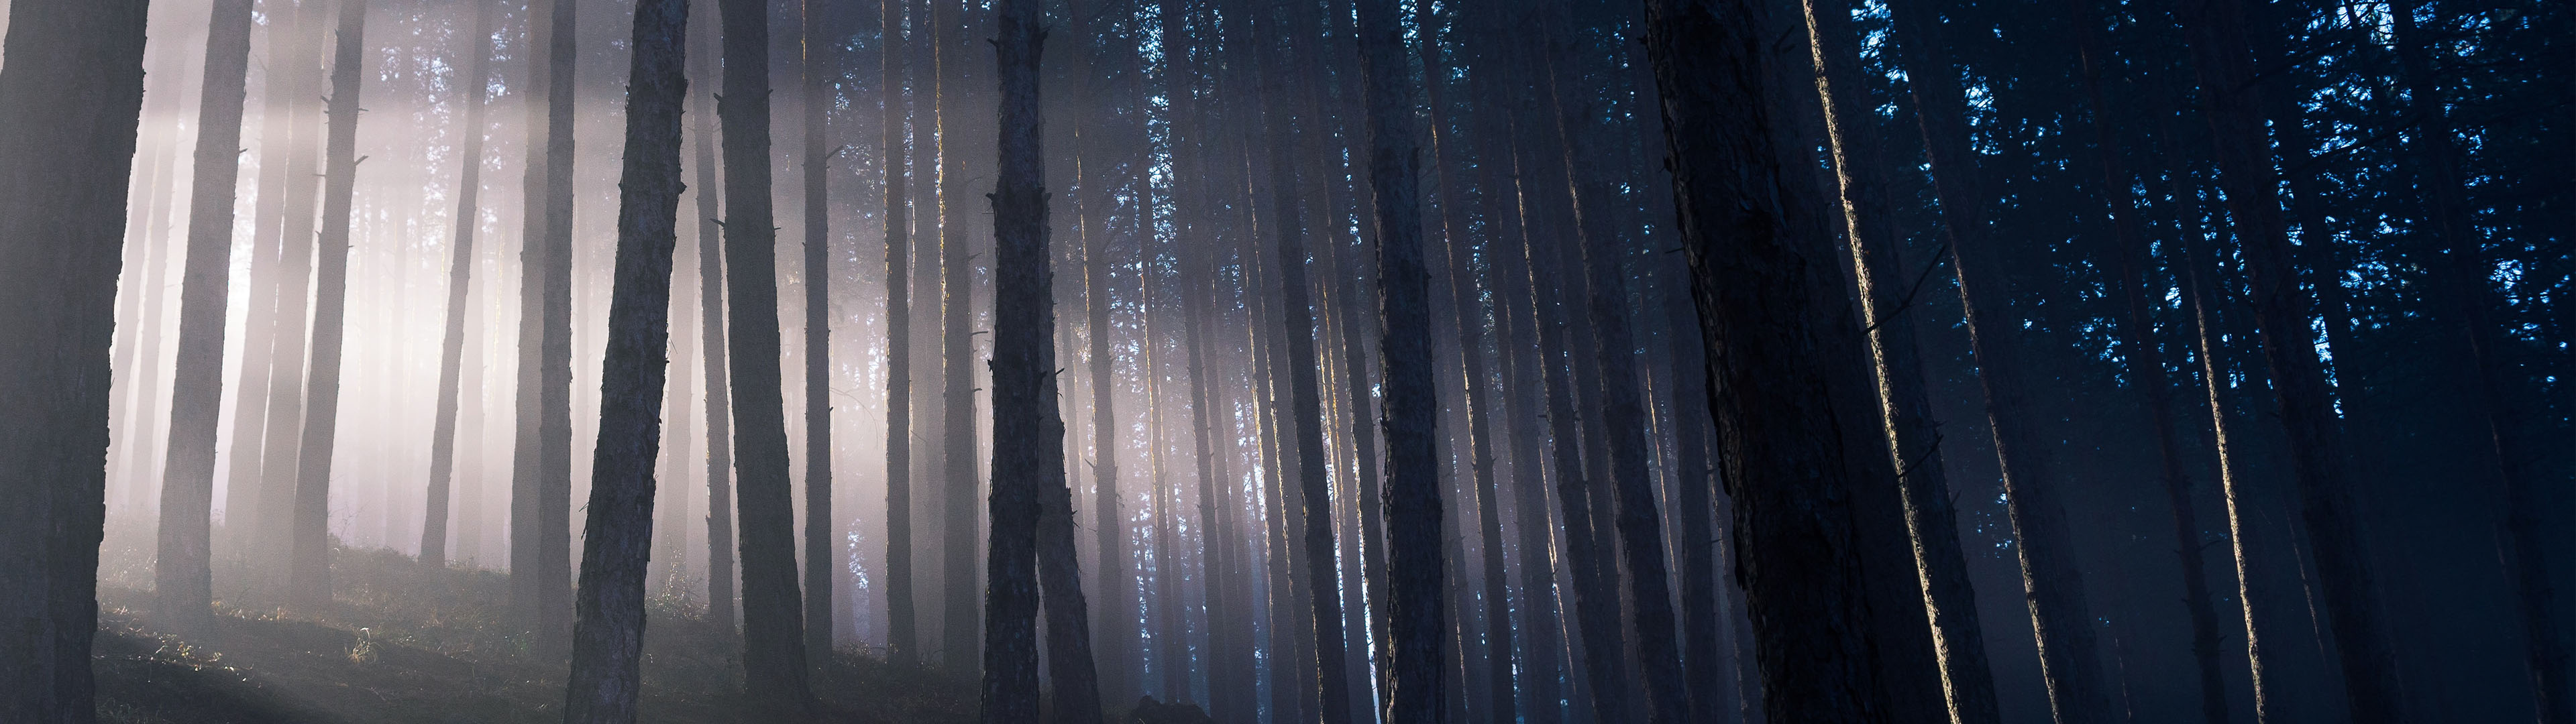 Into the Woods – (3840×1080 and 5120×1440 Wallpaper) | 32:9 Super Ultrawide  Wallpaper